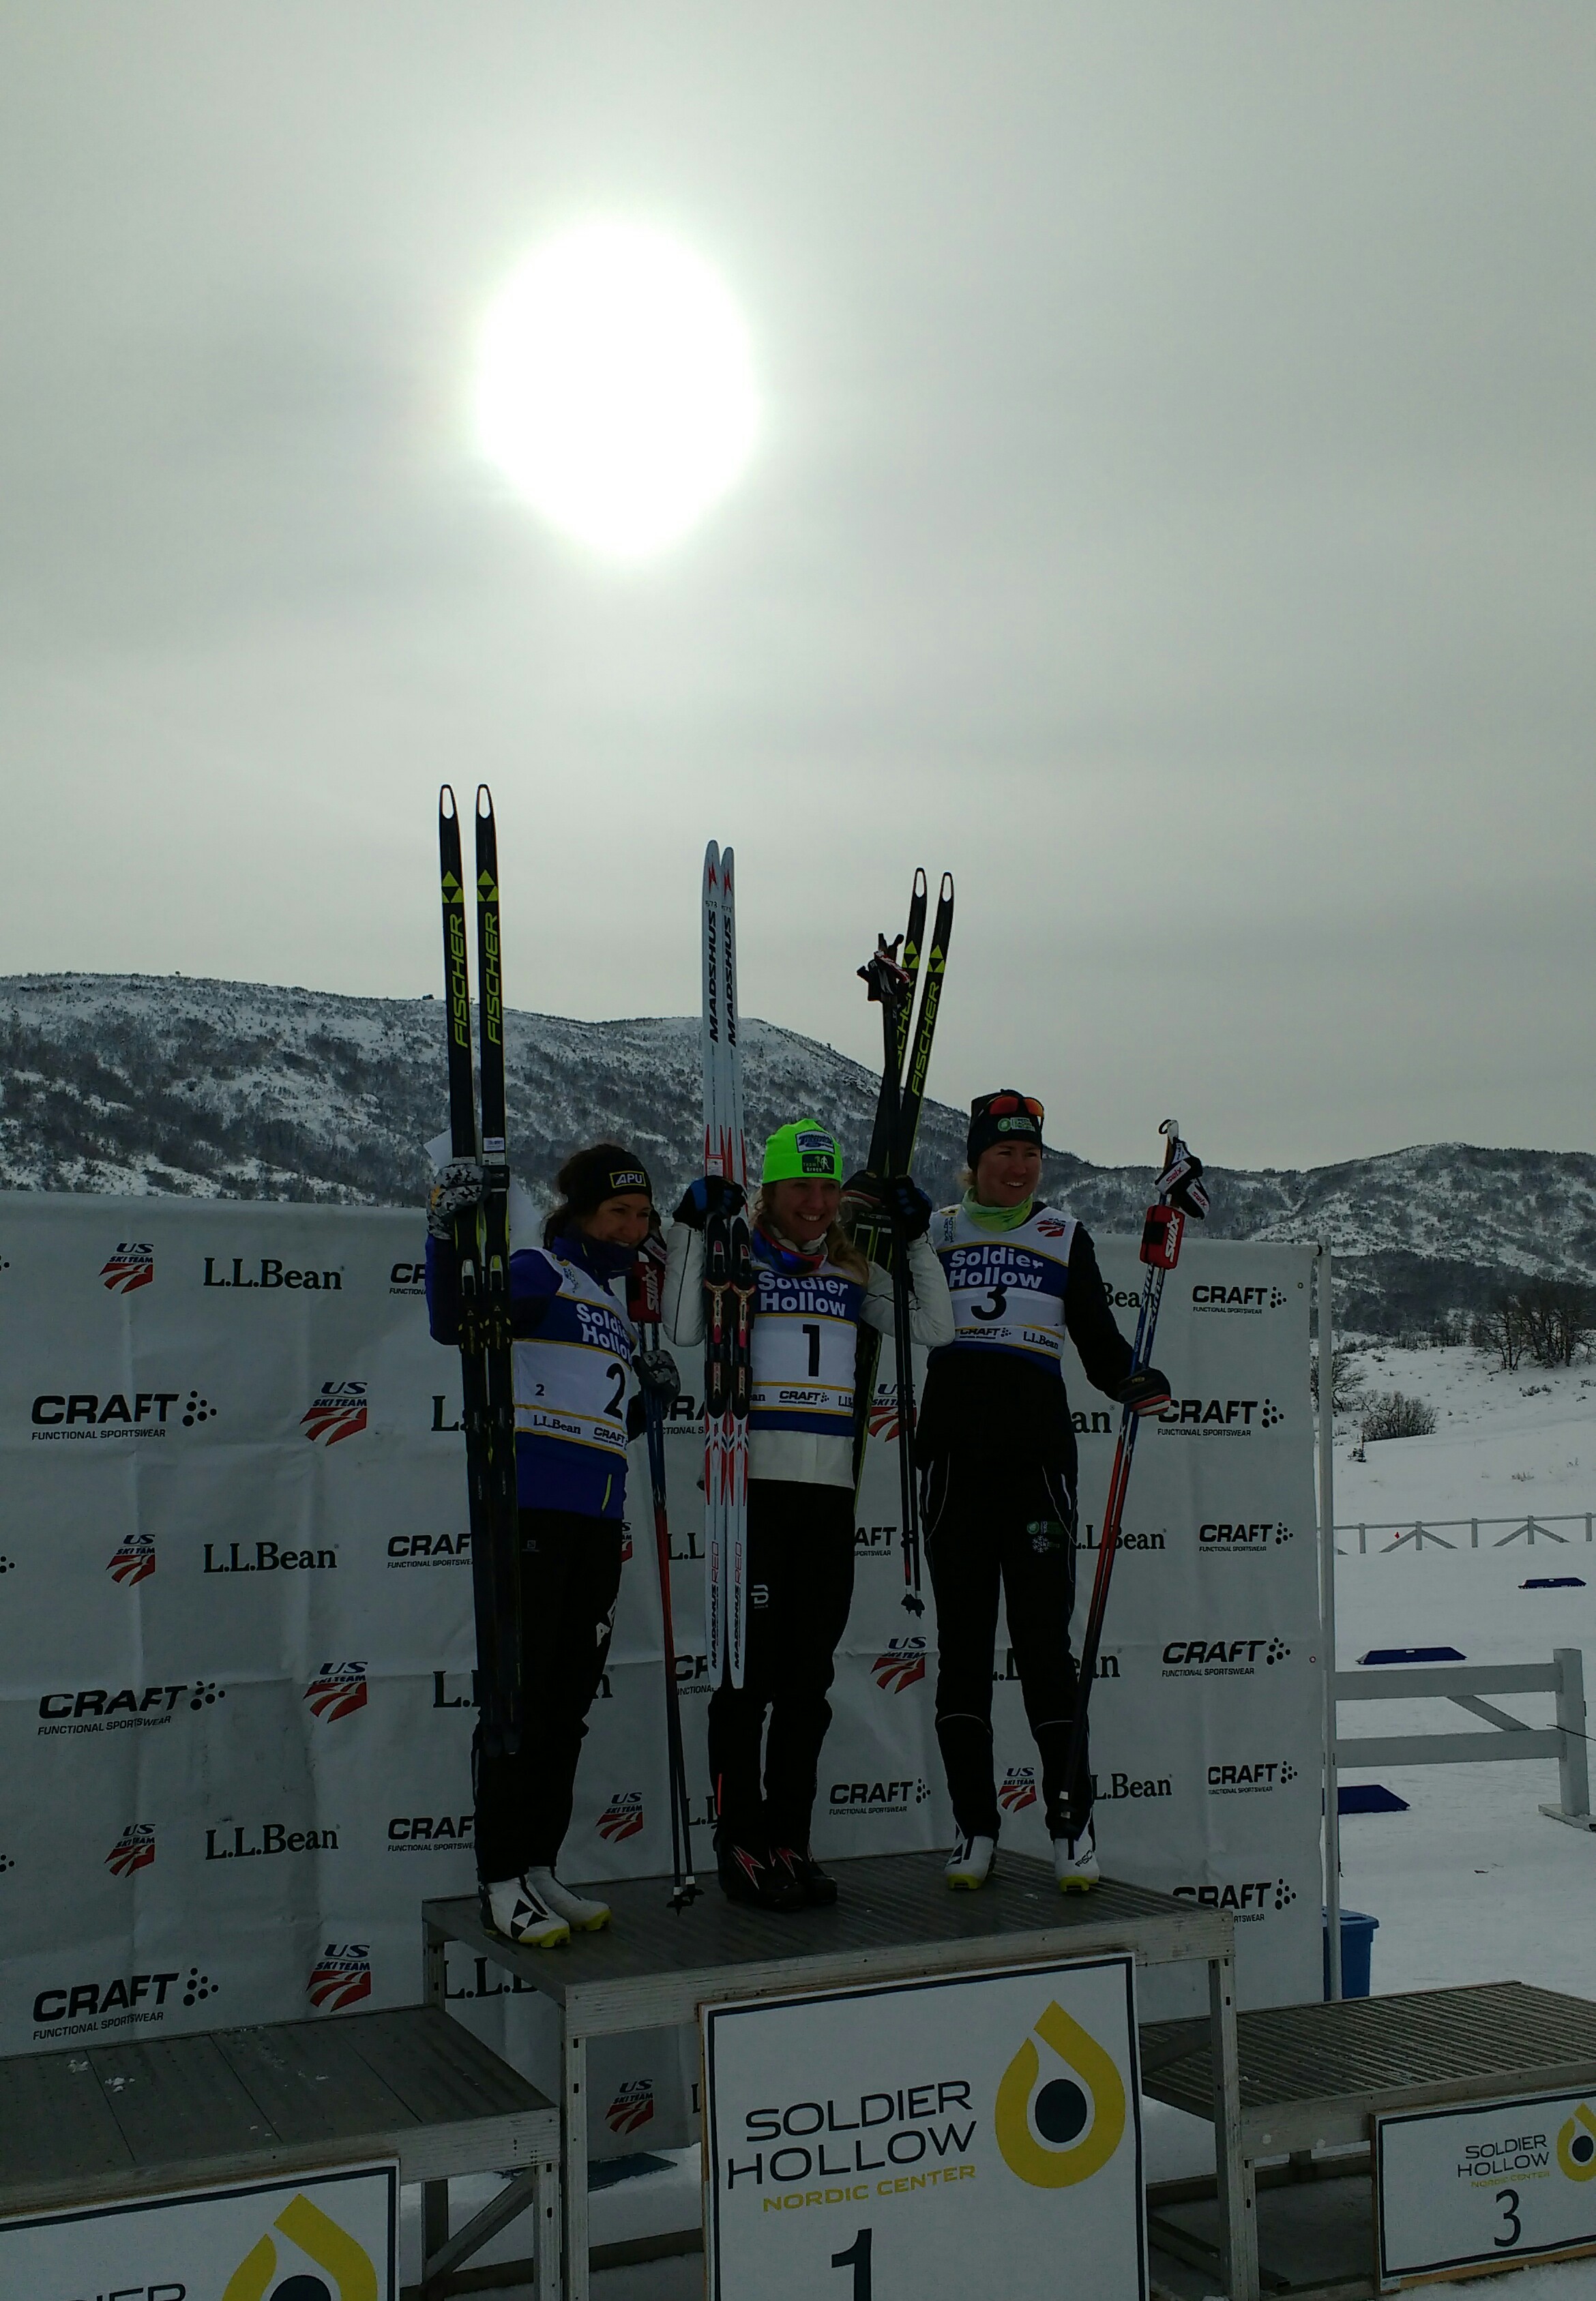 Left to right: Chelsea Holmes, Caitlin Gregg, and Caitlin Patterson standing on top of the podium for the women's 10-kilometer freestyle event at the 2017 U.S. Cross Country Championships at Soldier Hollow in Midway, Utah. 